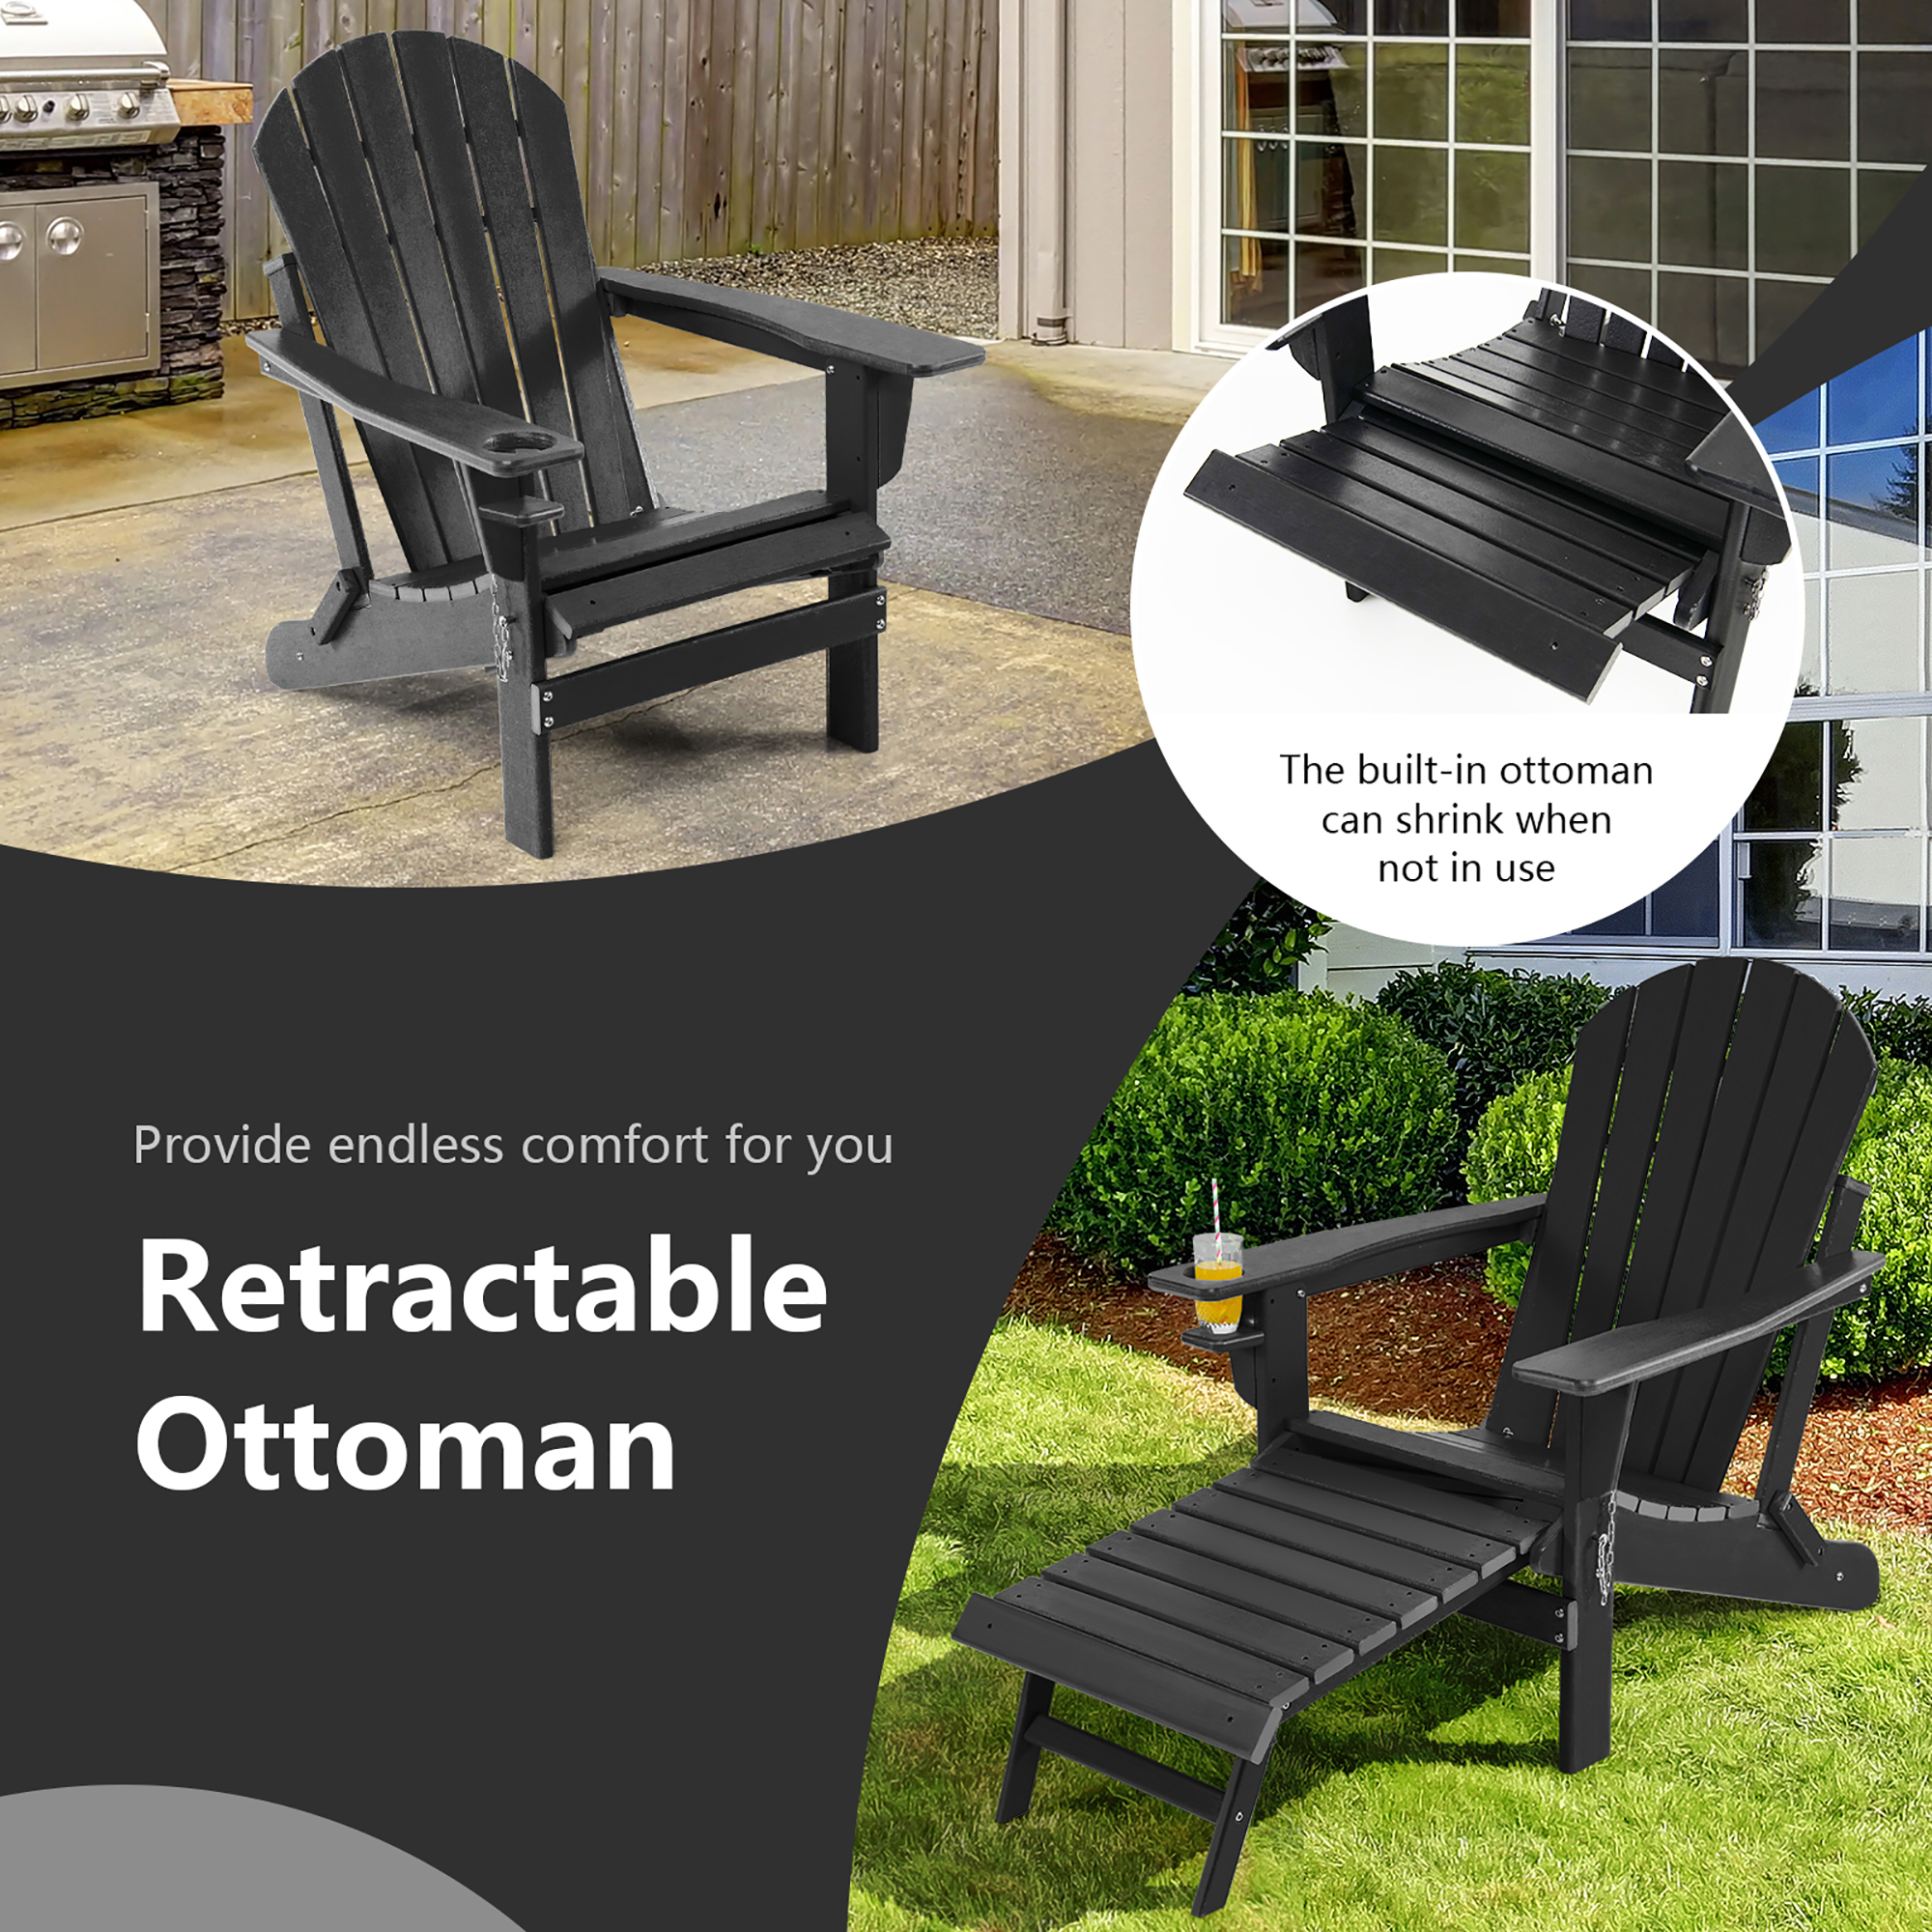 Costway Patio Folding Adirondack Chair HDPE All-Weather Pull-Out Ottoman White\Black\Coffee\Gray\Turquoise